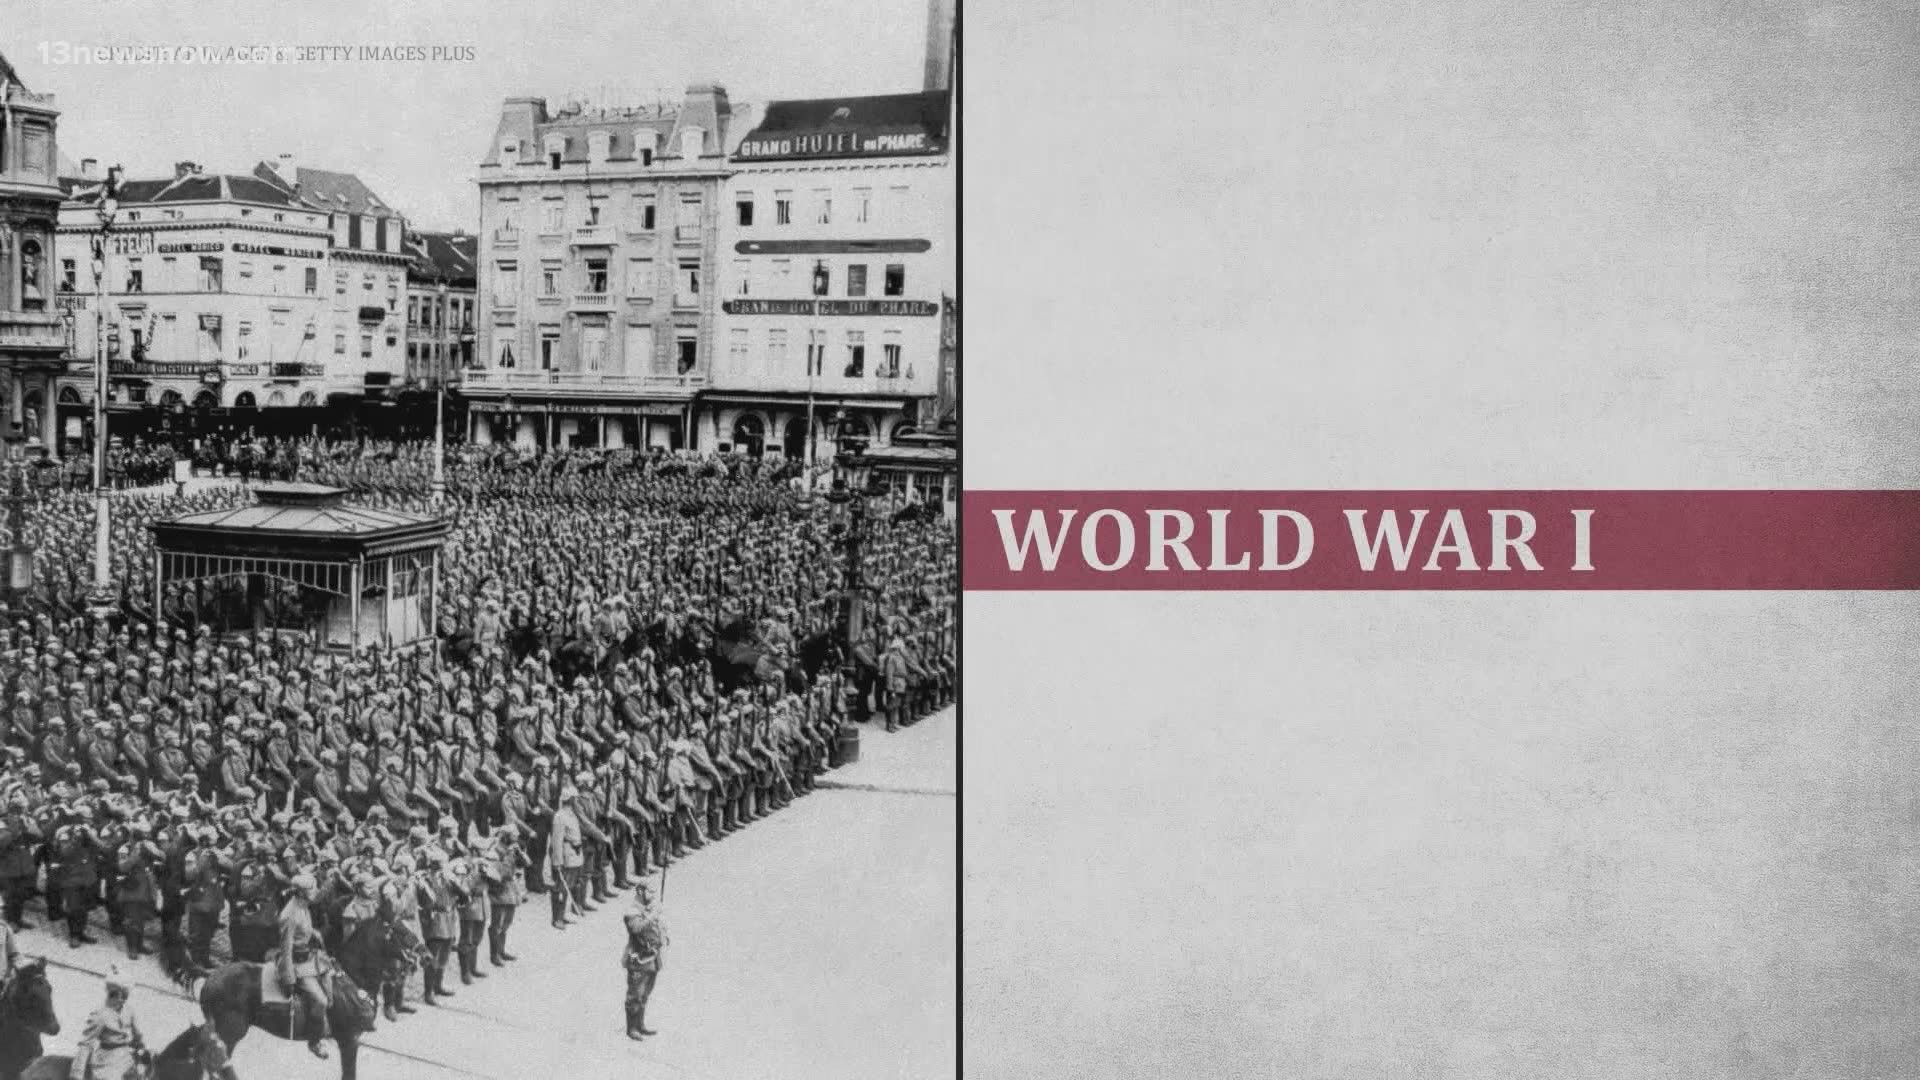 Veterans Day, as we know it, started at the end of World War 1. It started as "Armistice Day."